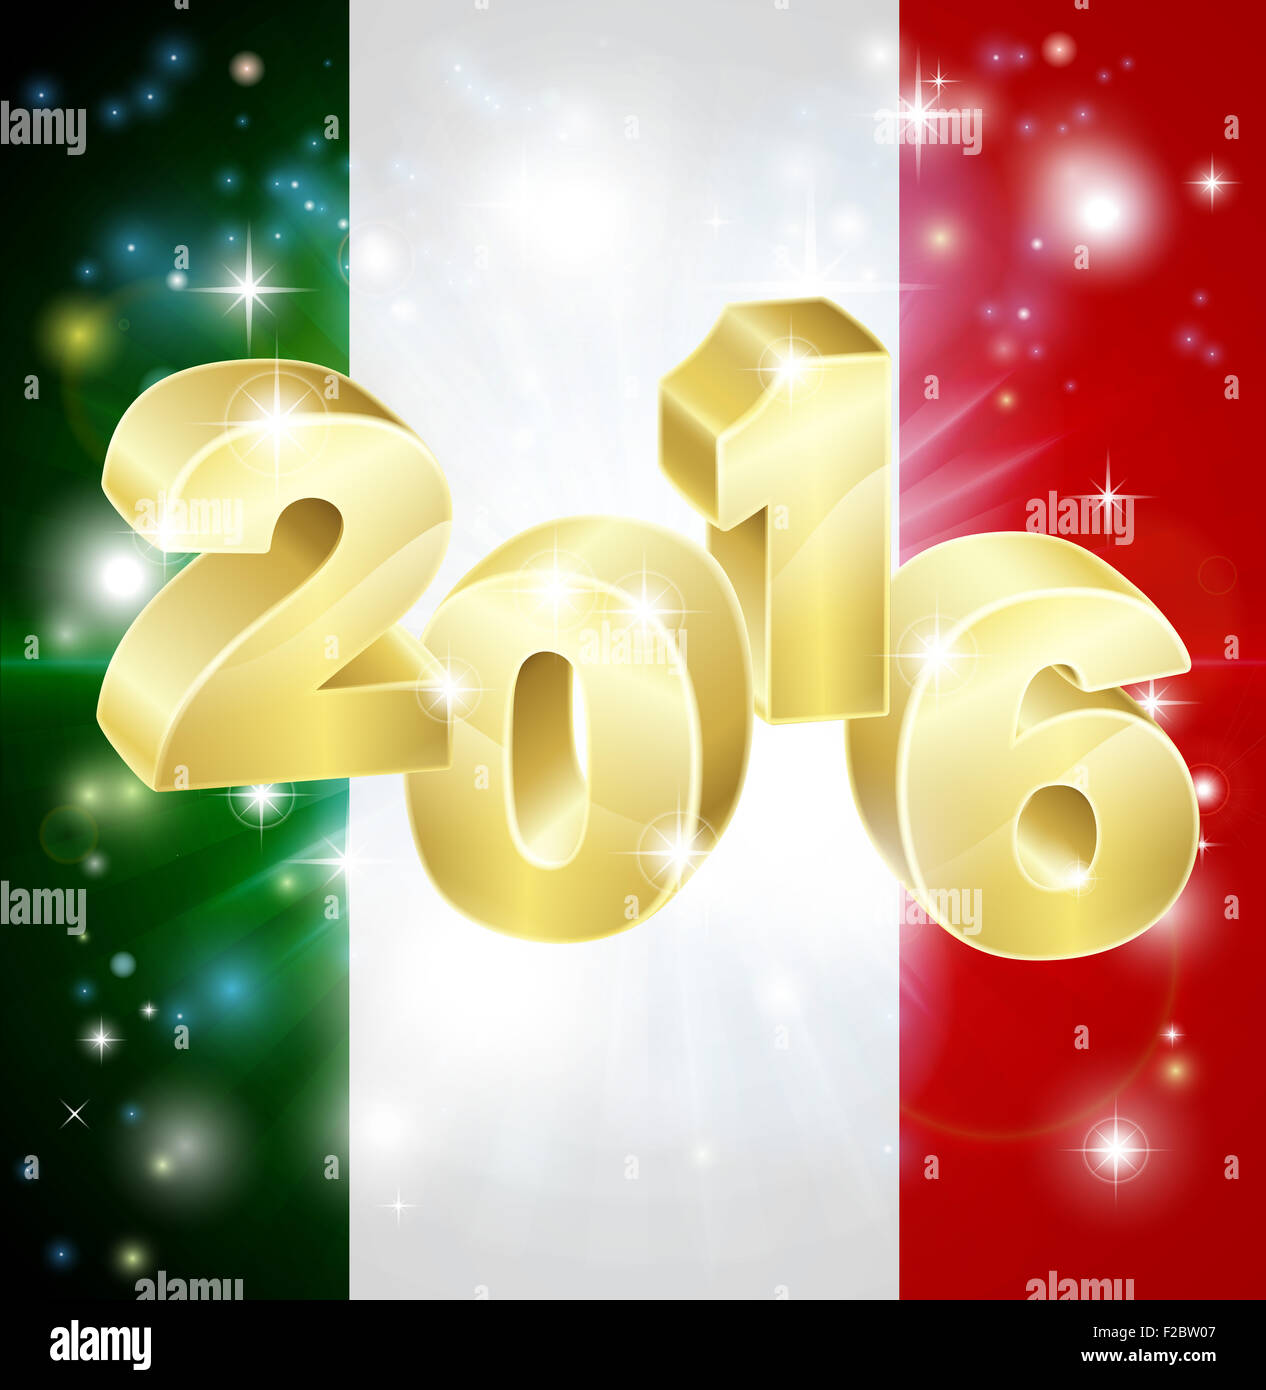 An Italian flag with 2016 coming out of it with fireworks. Concept for New Year or anything exciting happening in Italy in the y Stock Photo